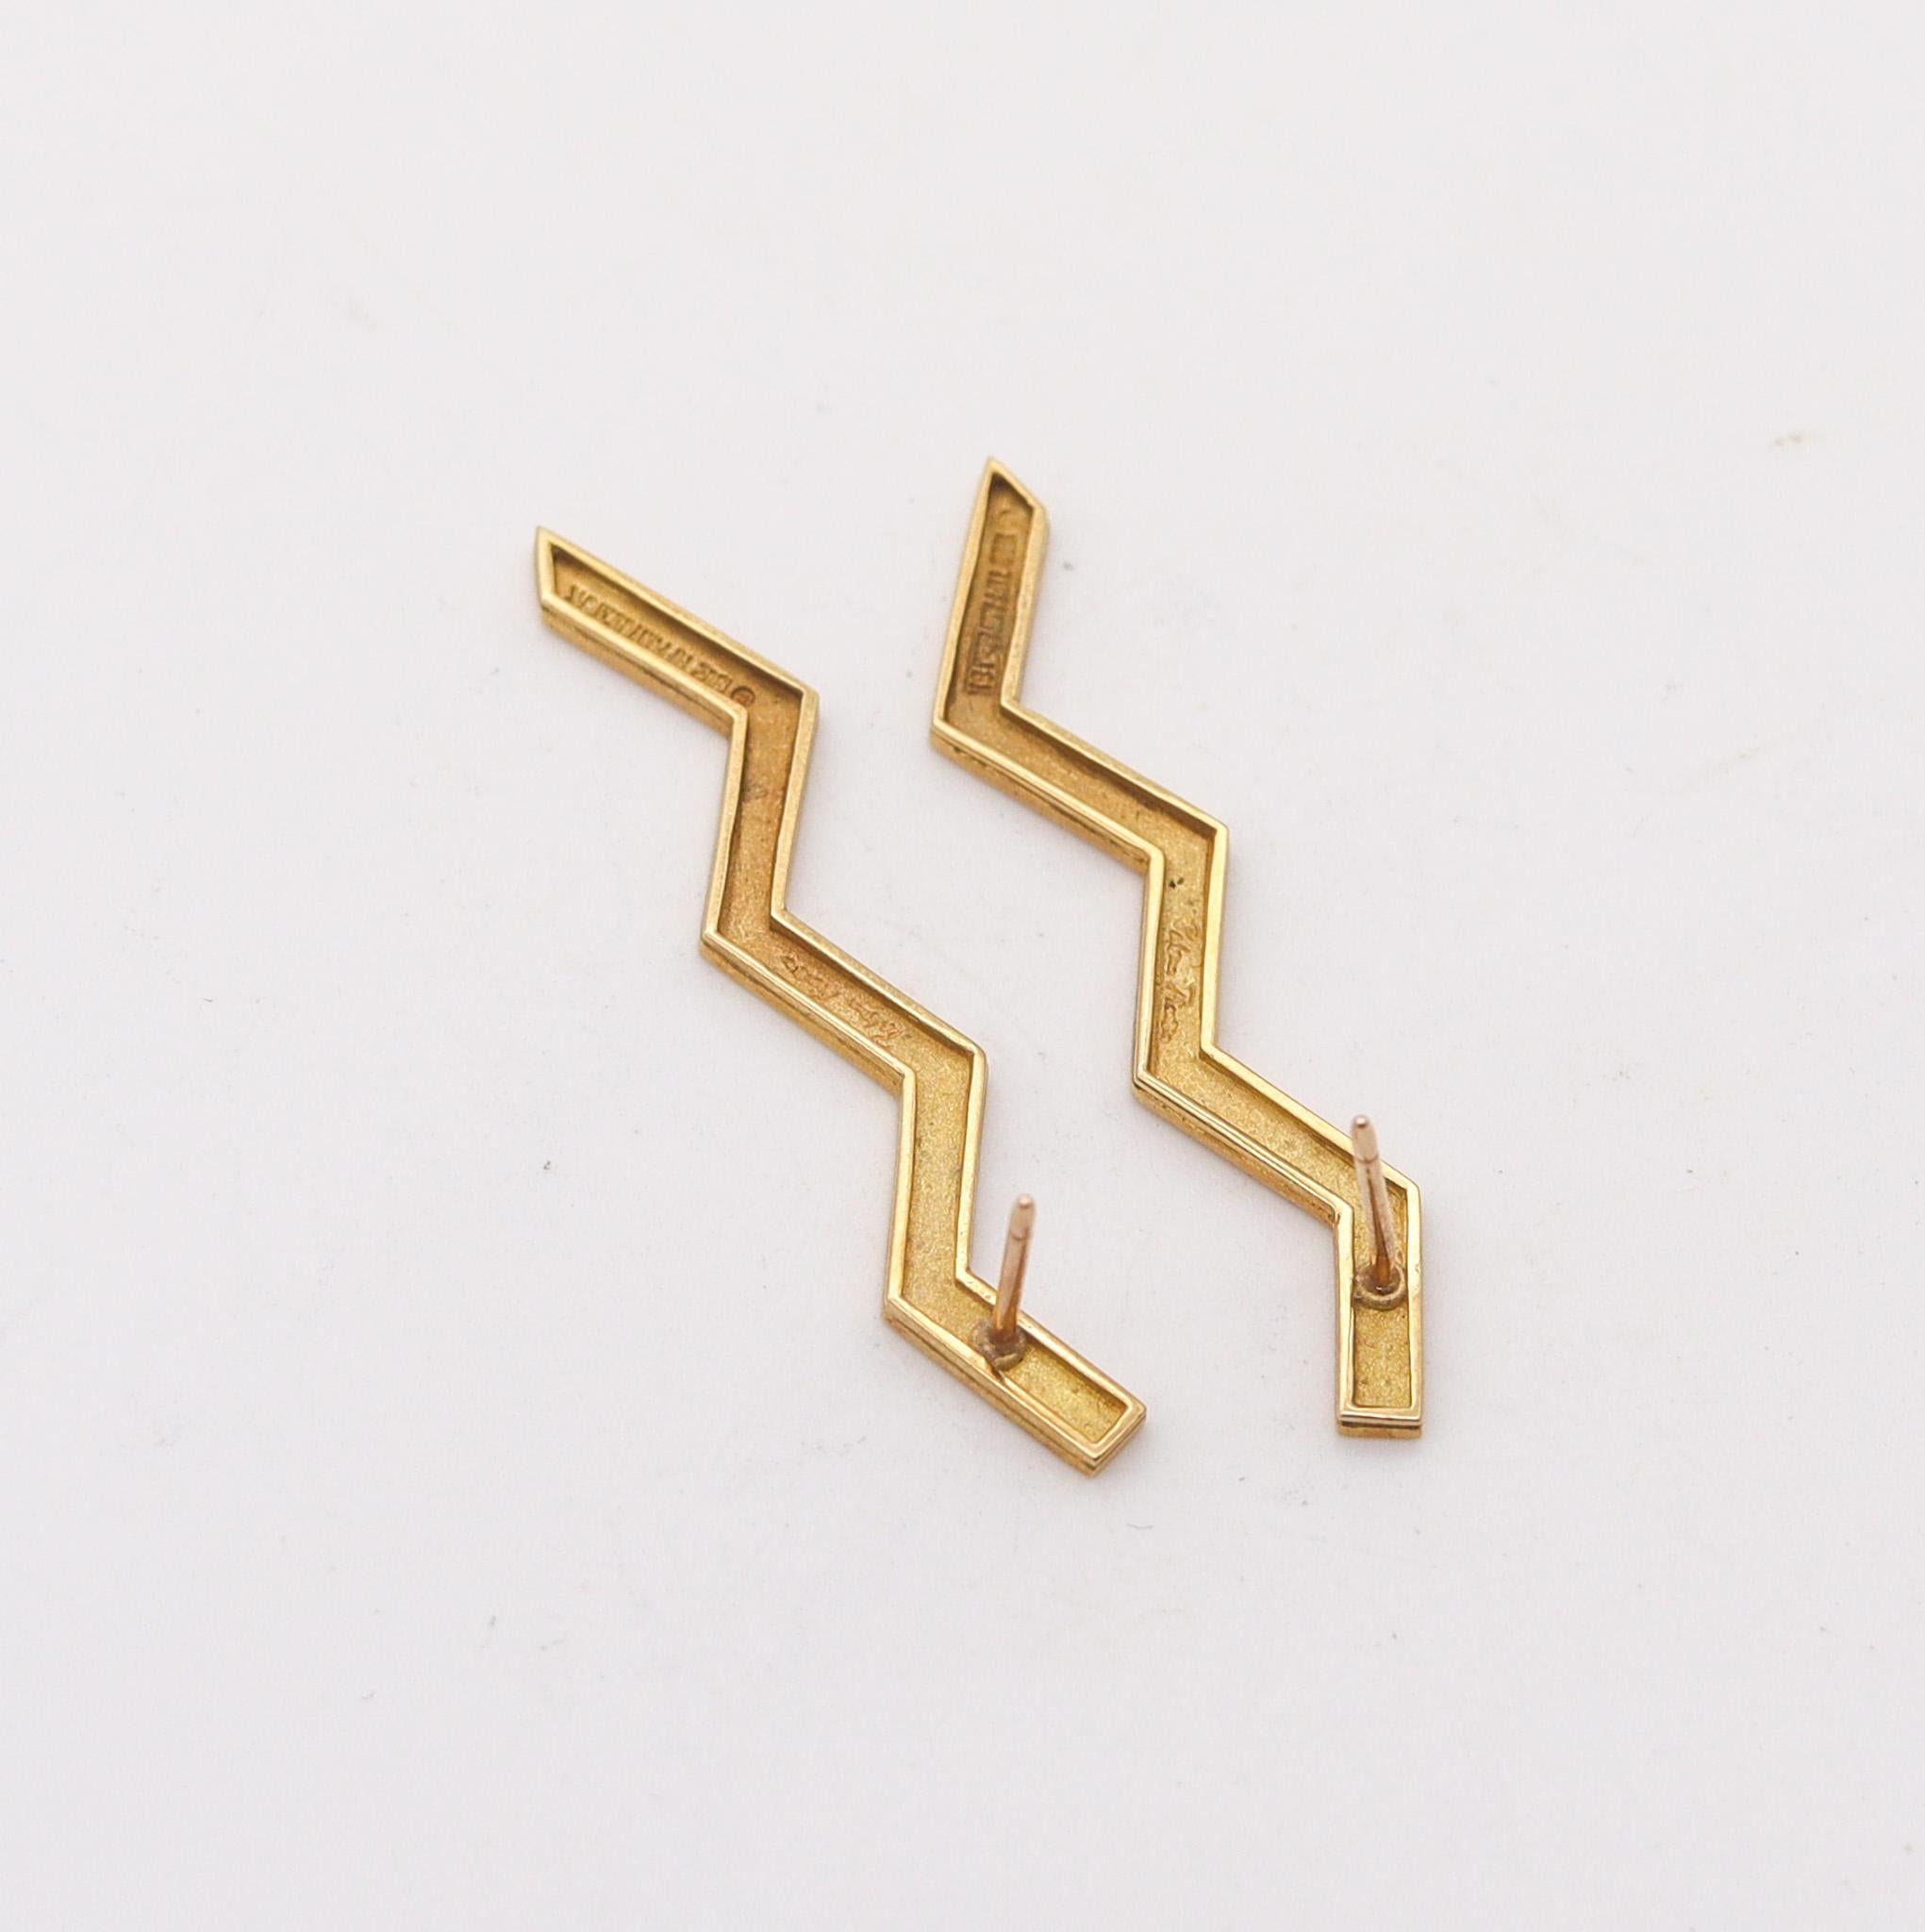 Modernist Tiffany & Co. 1982 By Paloma Picasso Zig Zag Earrings In Solid 18Kt Yellow Gold For Sale